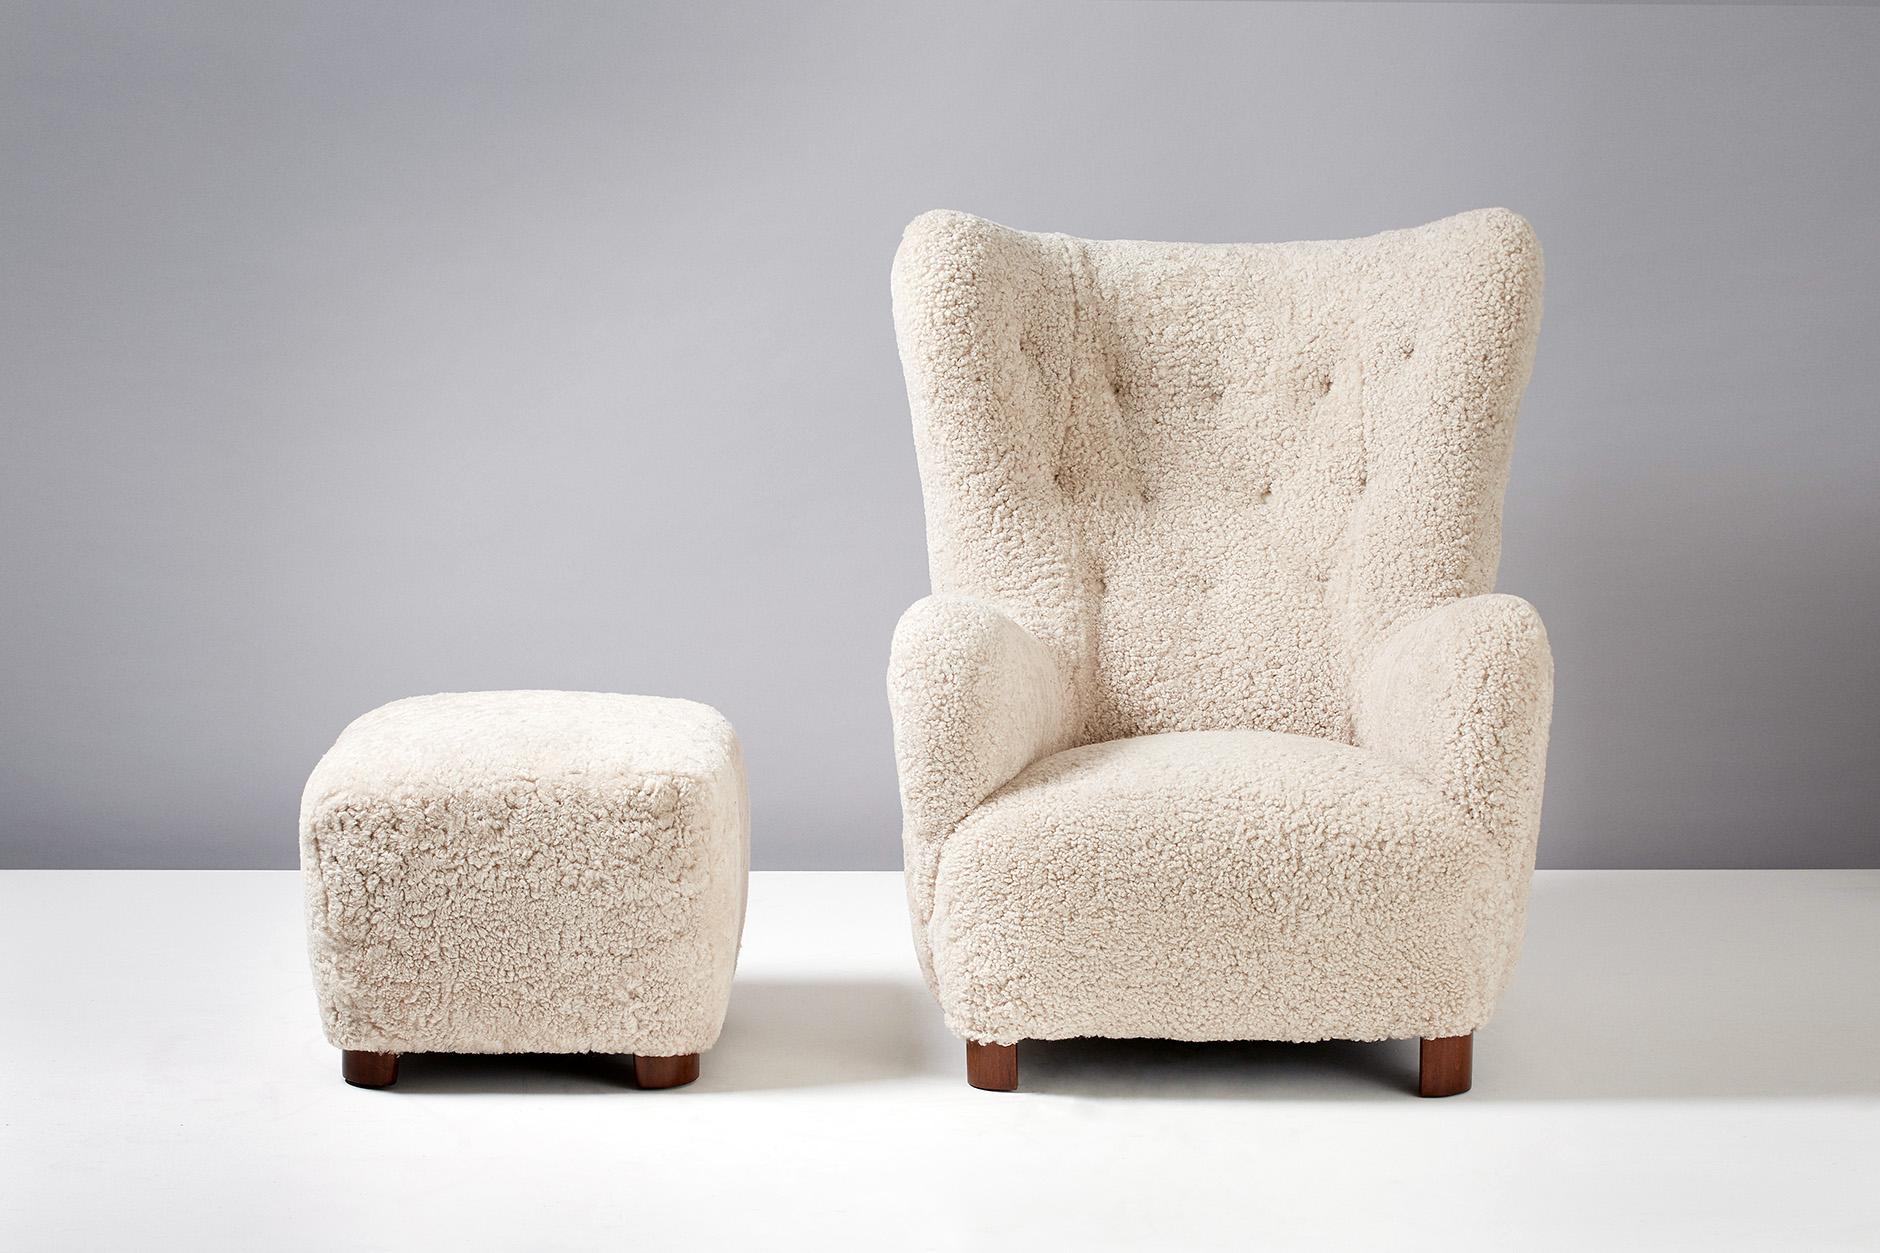 Flemming Lassen style Sheepskin lounge chair & Ottoman 1940s.

Large lounge chair & ottoman produced in Denmark in the 1940s in the manner of Flemming Lassen. Recently reupholstered in New Zealand sheepskin.
       